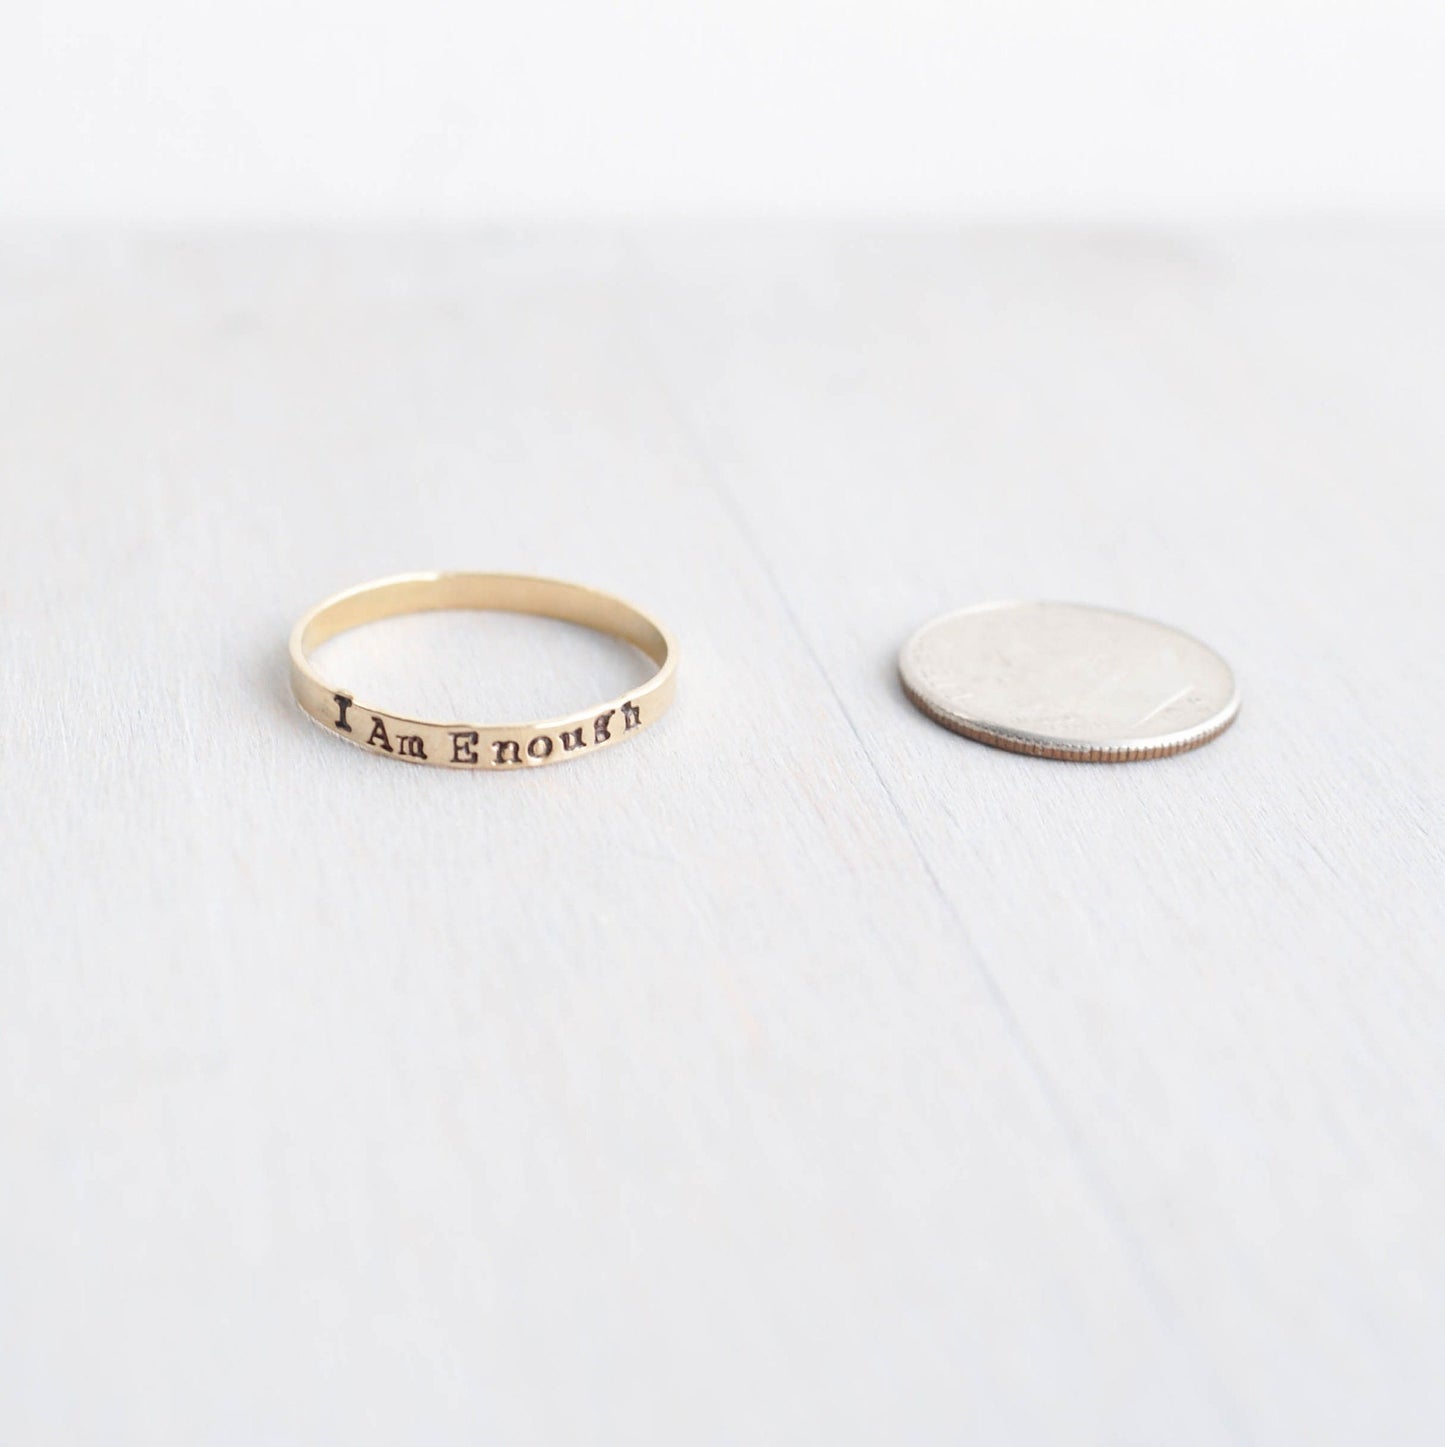 I am Enough ring handstamped in gold-filled next to dime